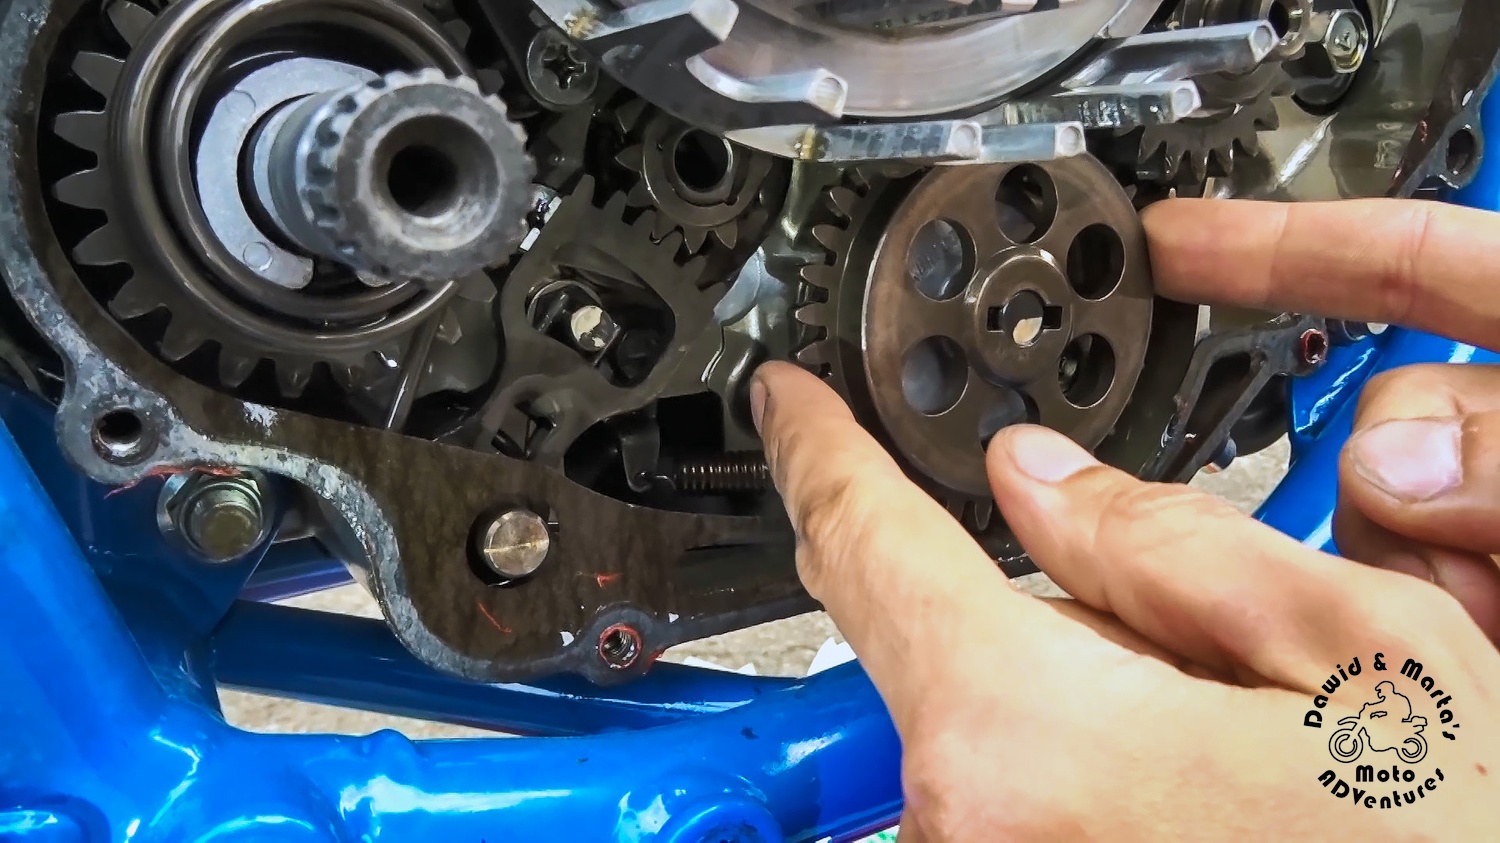 Removing the oil sump driven gear in DR350